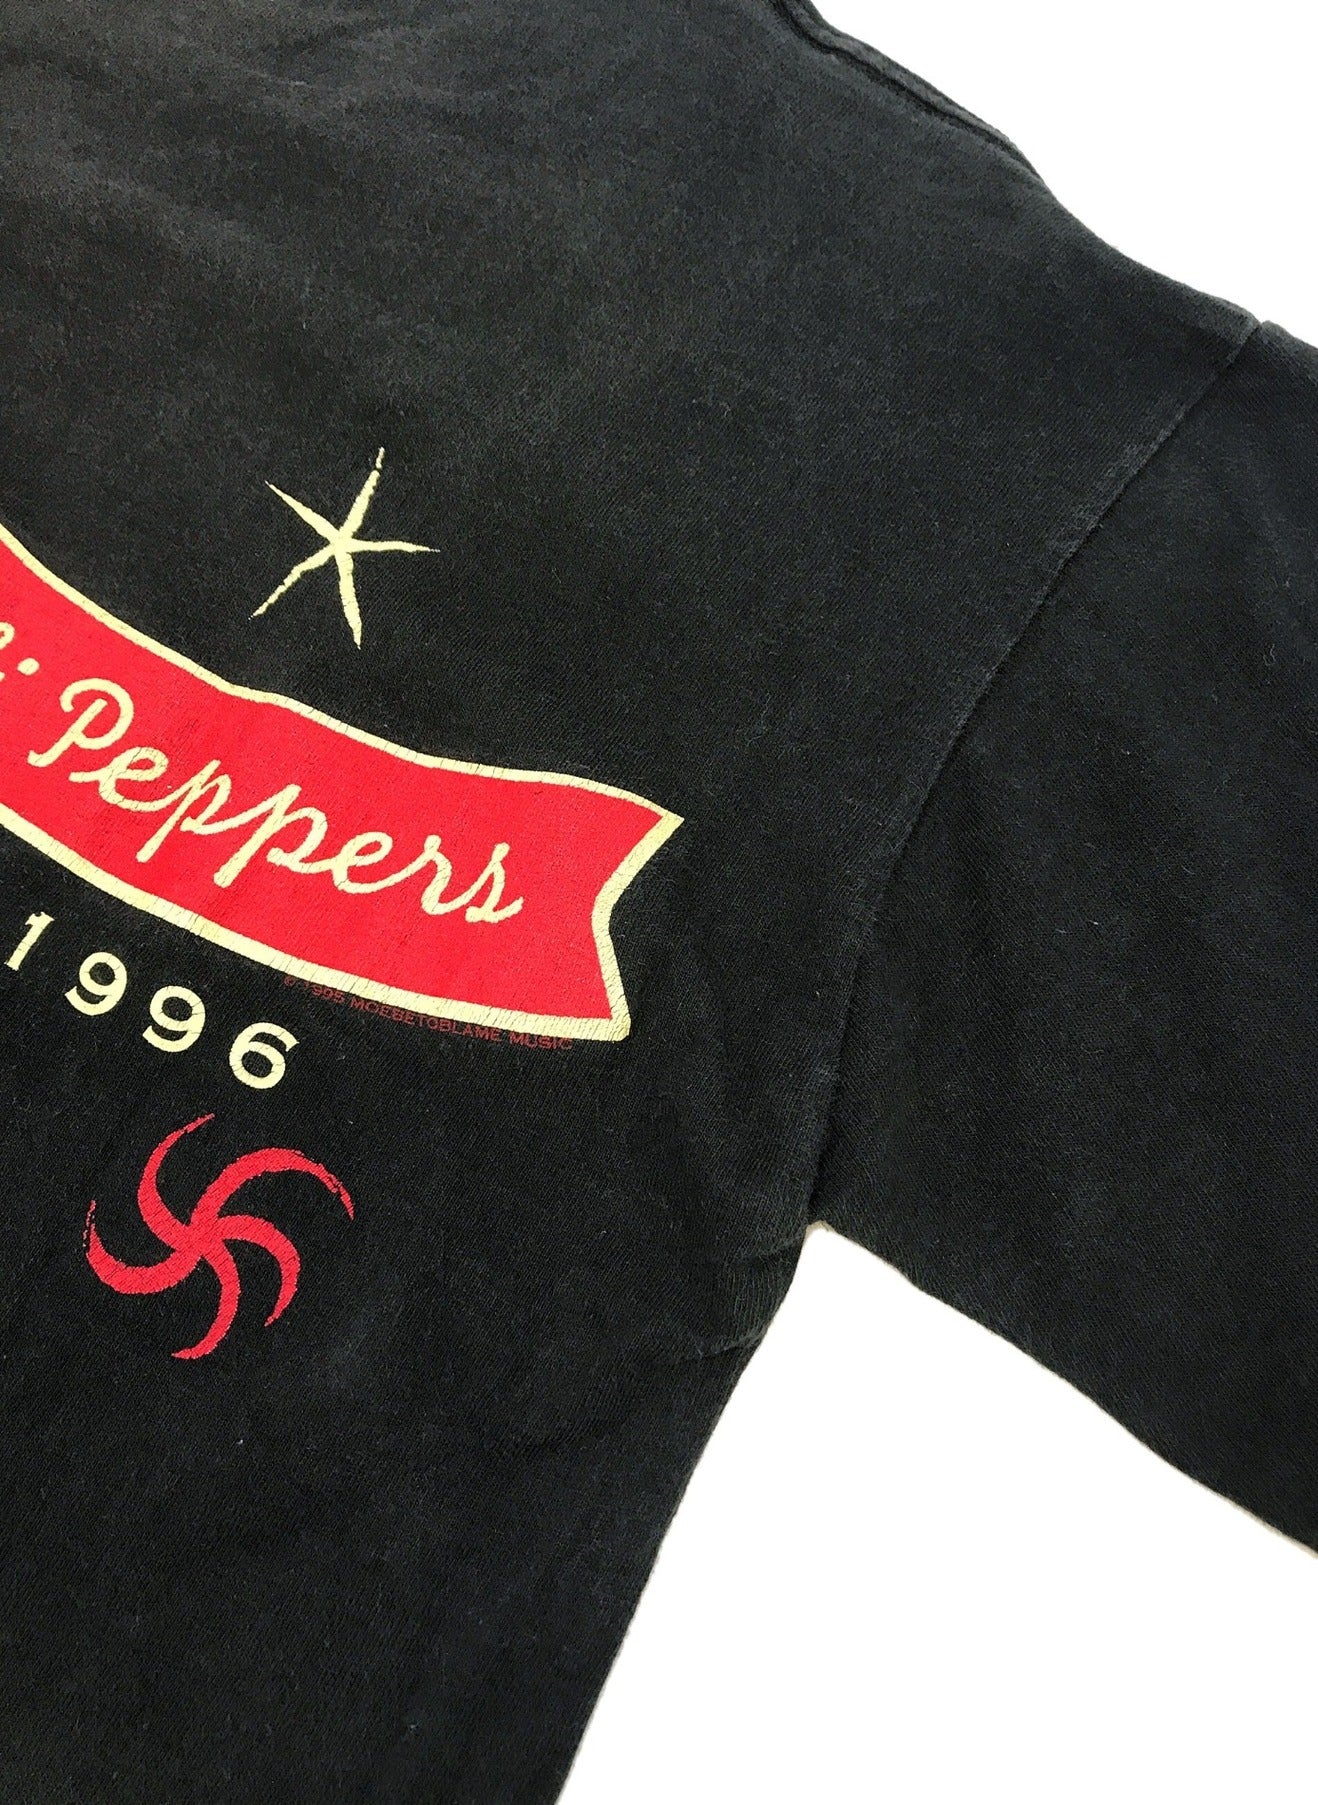 [Vintage Clothes] Red Hot Chili Peppers Band T-Shirt